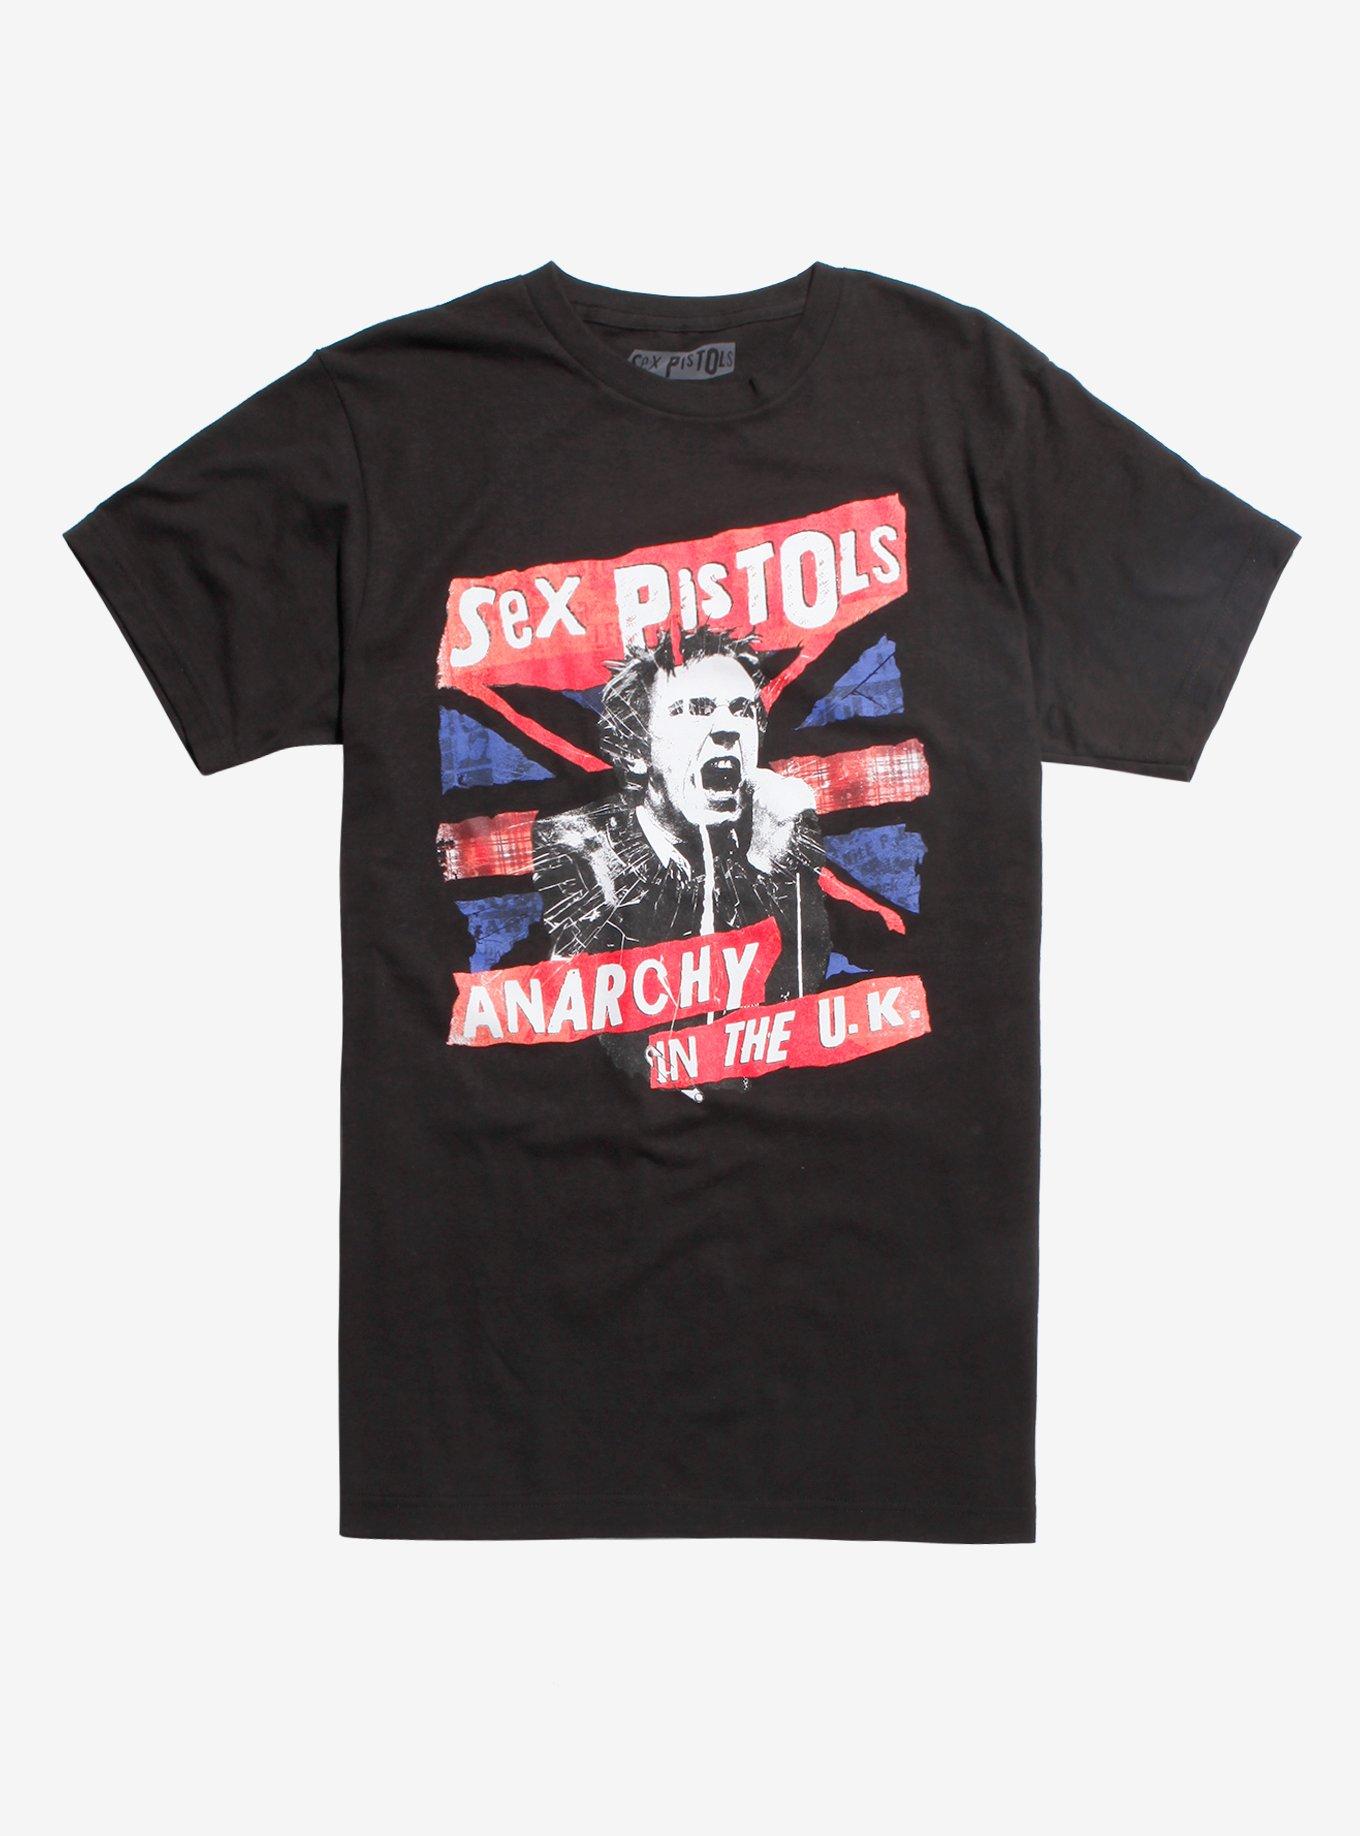 Sex Pistols Anarchy In The